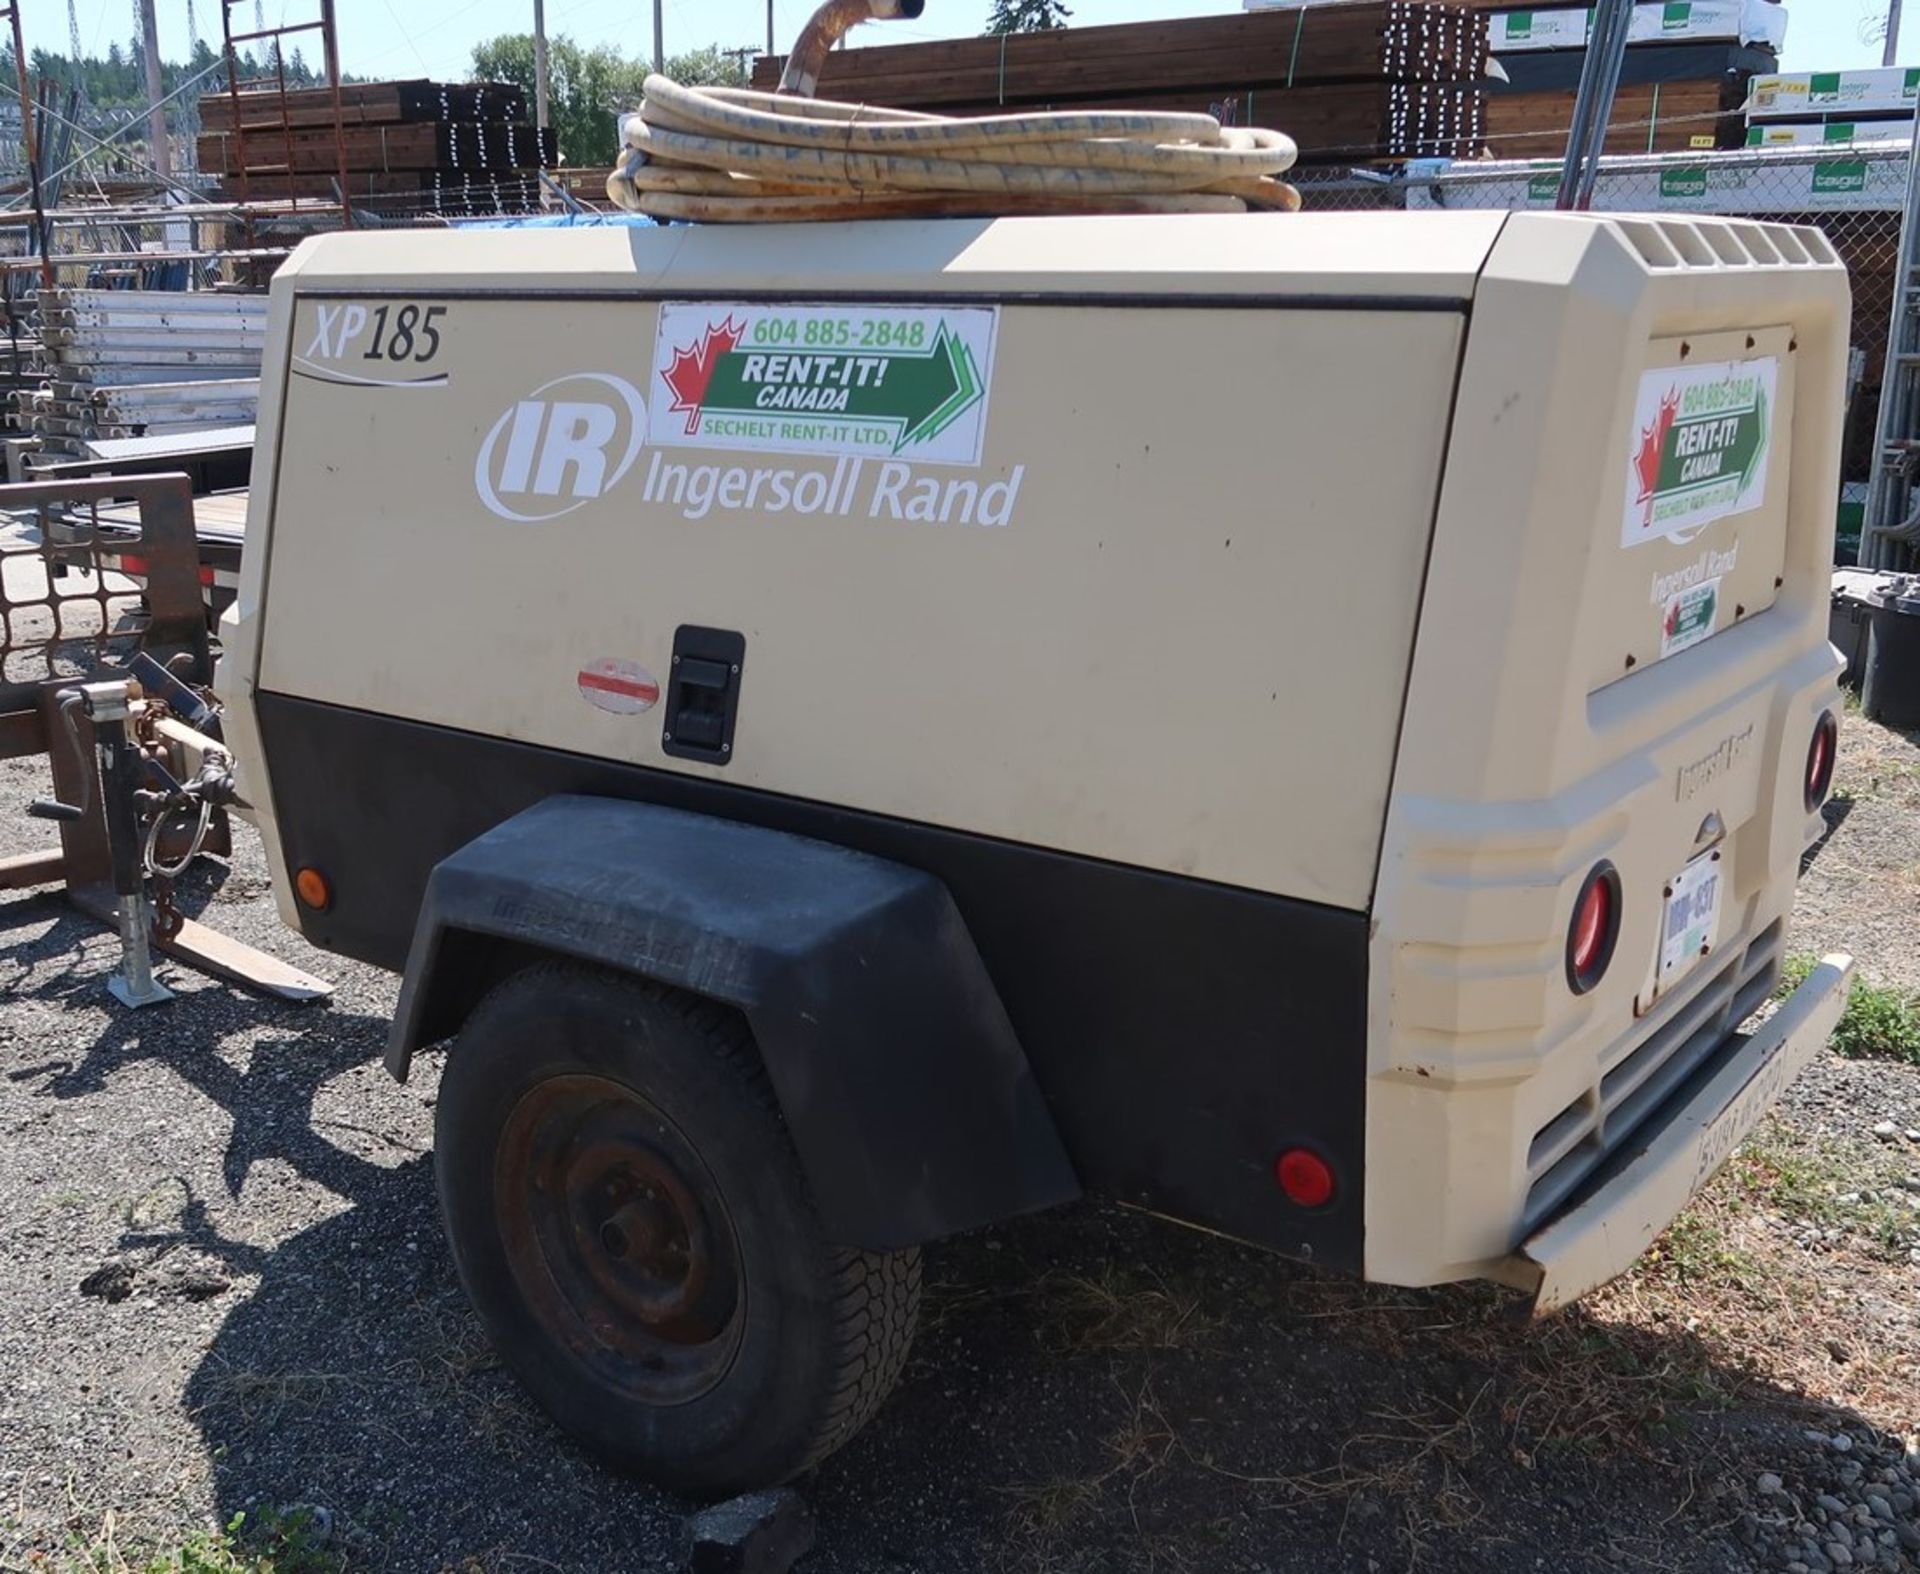 INGERSOLL RAND PORTABLE COMPRESSOR, MOD. XP185, 3711 HOURS - Image 2 of 7